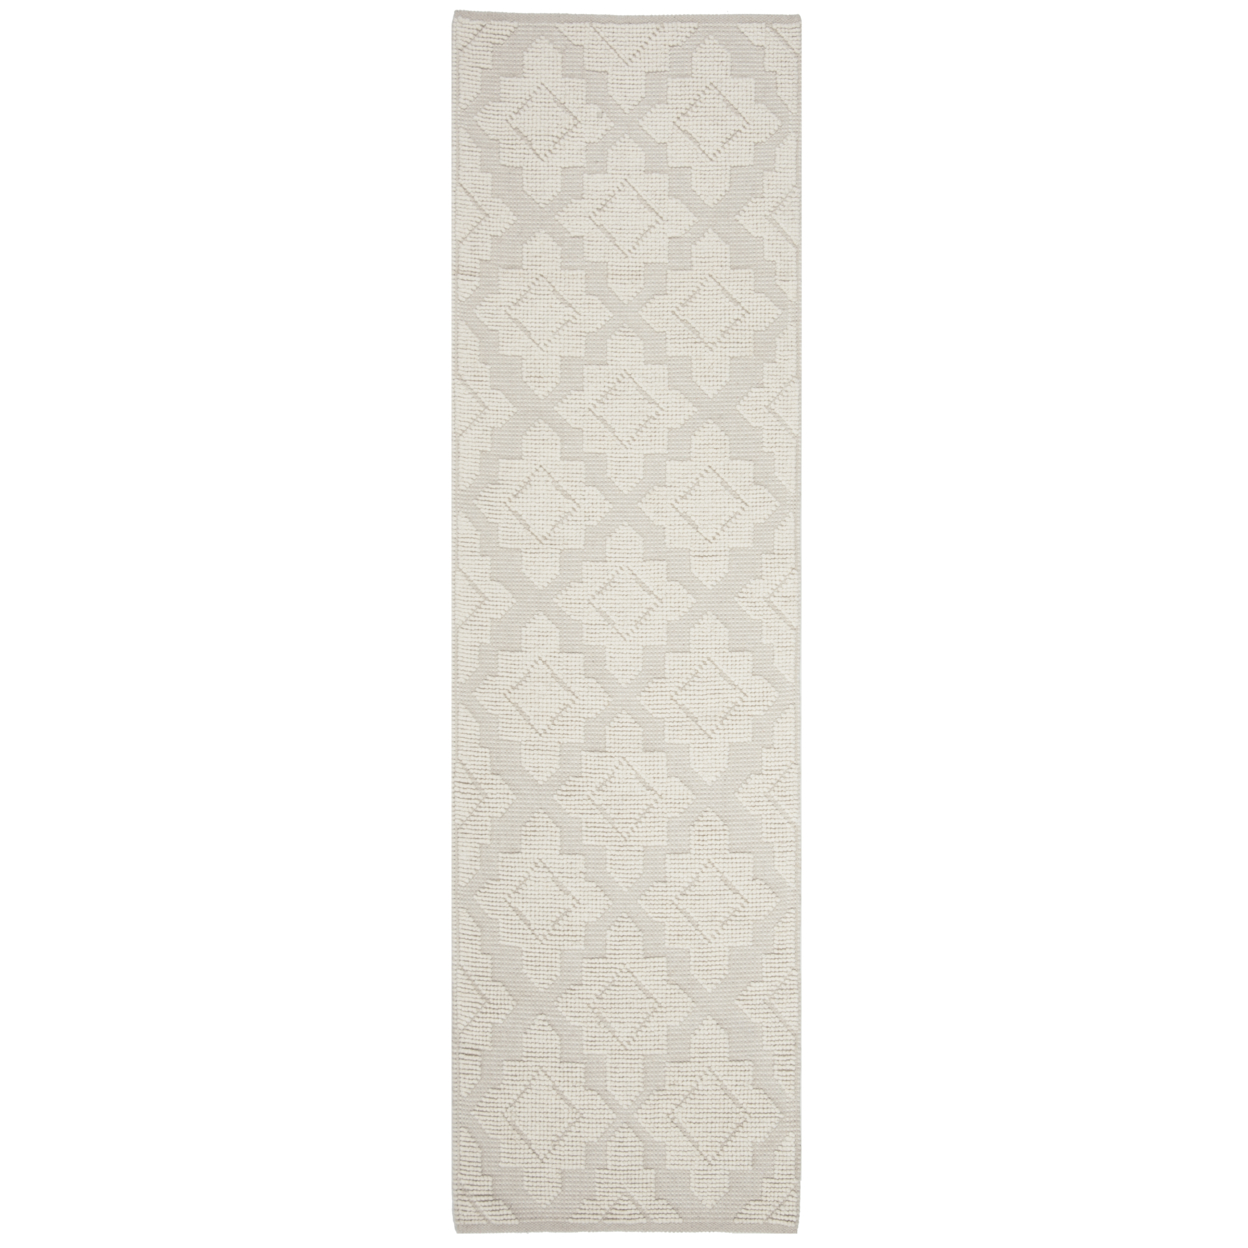 SAFAVIEH Vermont Collection VRM103A Handwoven Ivory Rug - 8 X 10